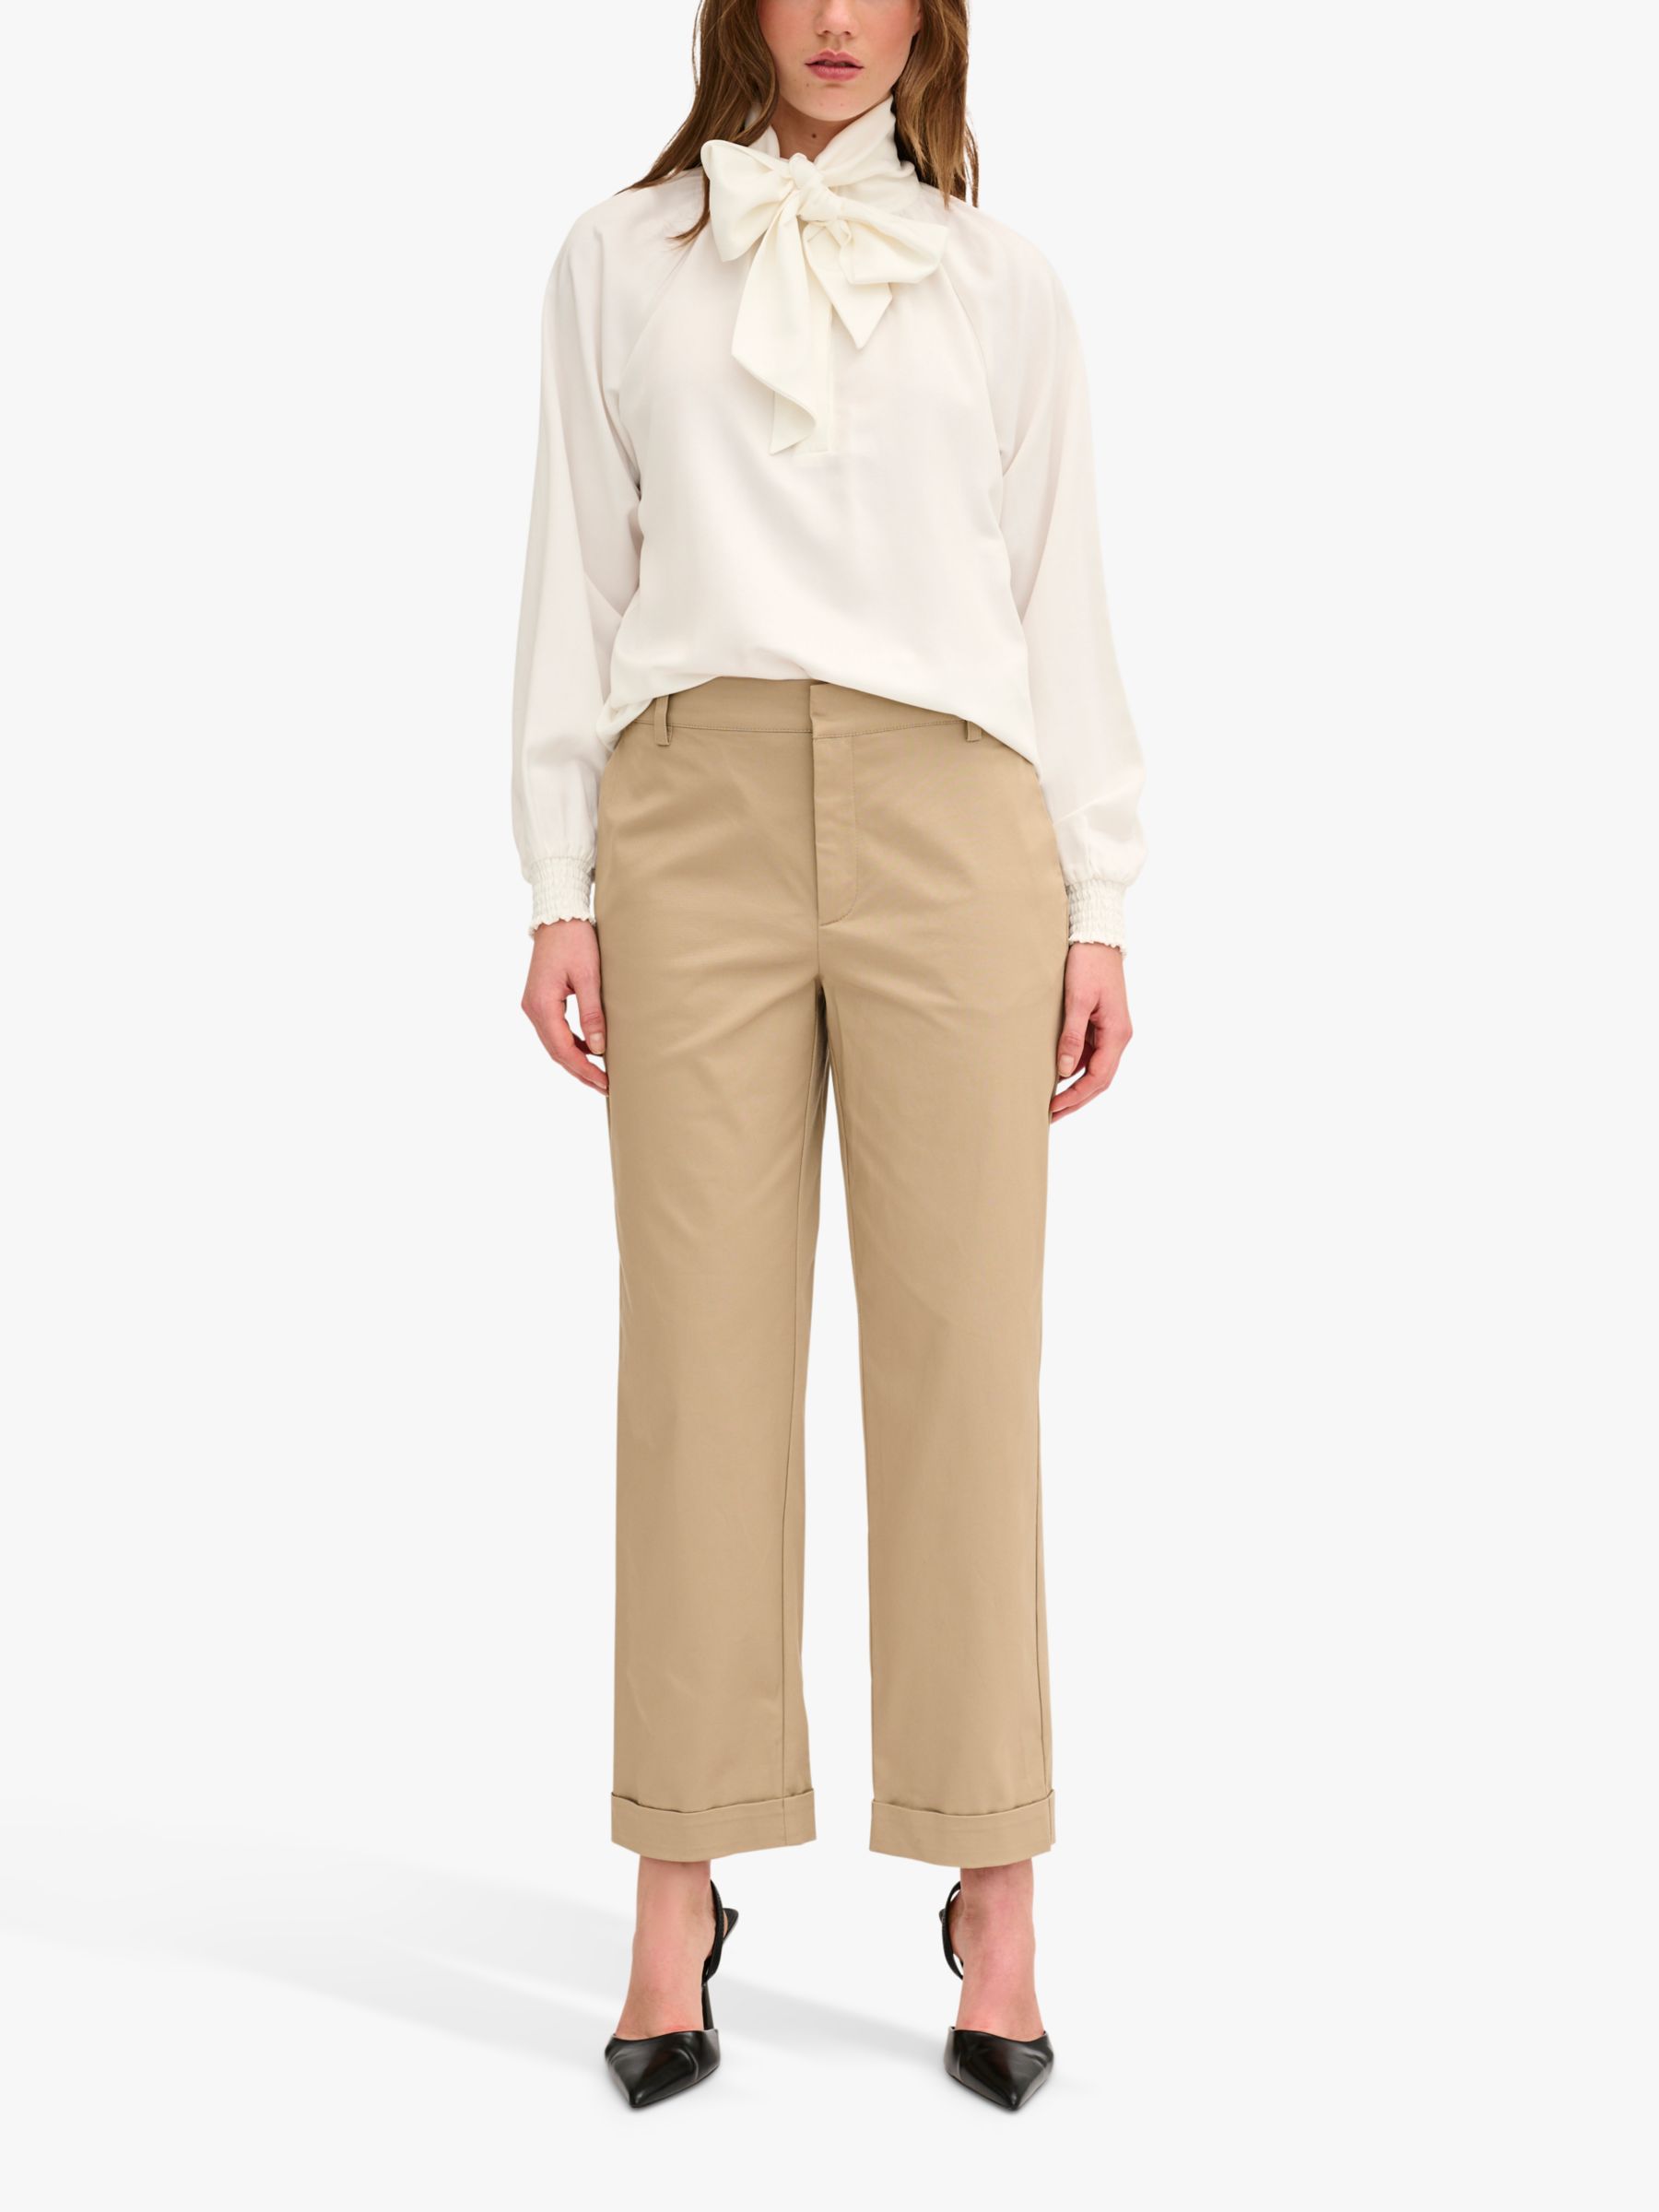 Buy MY ESSENTIAL WARDROBE Estelle Pussybow Blouse, Snow White Online at johnlewis.com